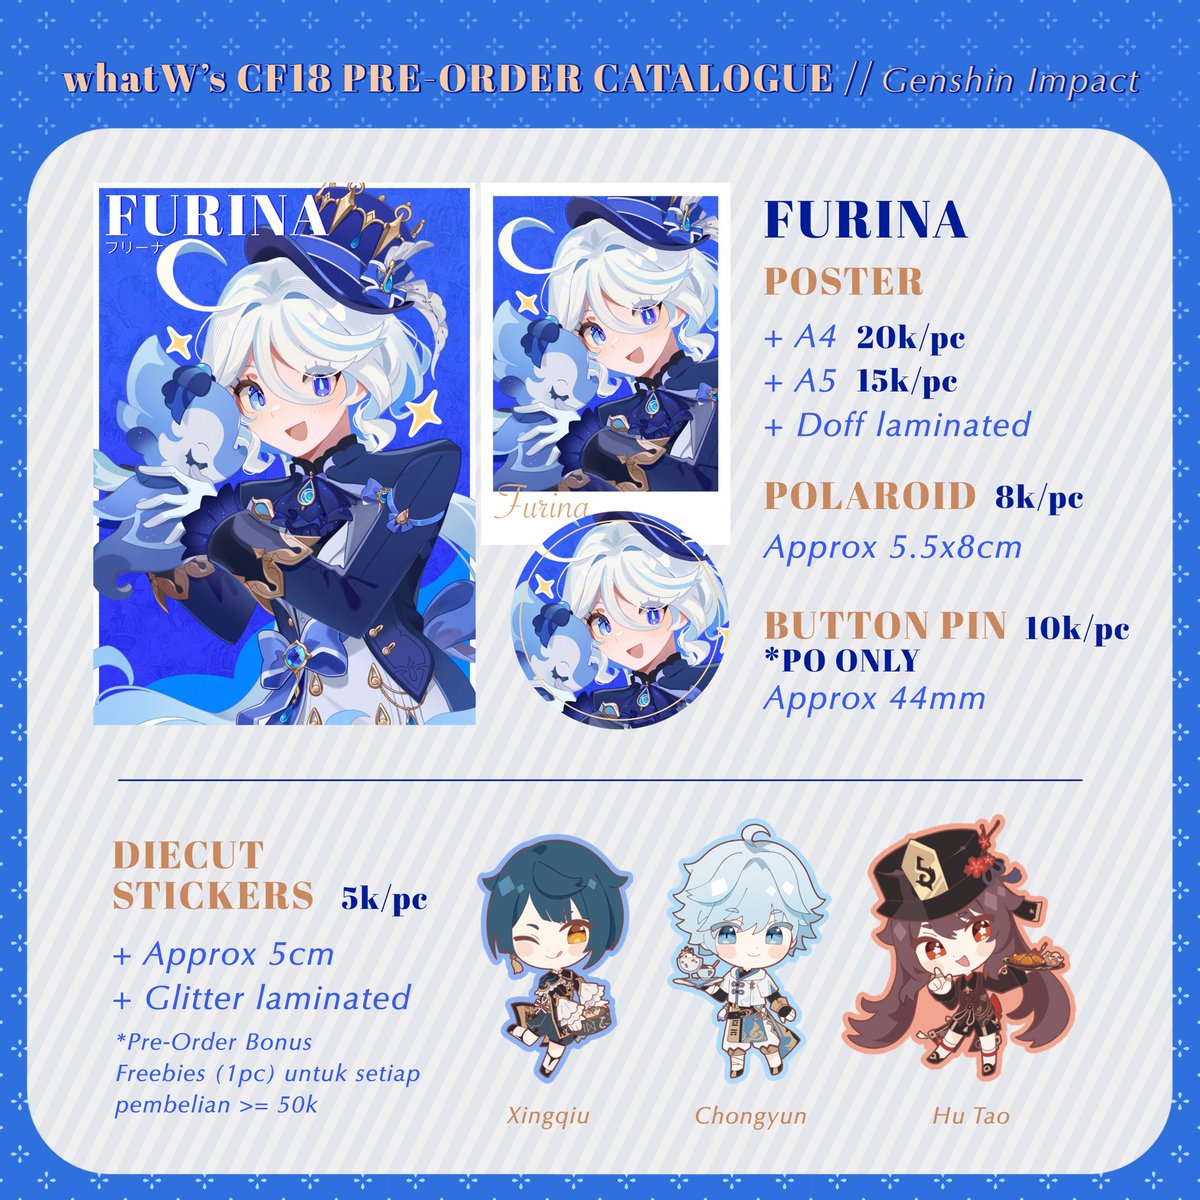 [Like & RTs are appreciated💙] CF18 PO (OTS/Mail Order) OPEN 15-21 APRIL! Booth: origamidragon (J30) DAY 1 ONLY Fandoms: Genshin, HSR, PRSK, Animals, etc 🔗 forms.gle/xcwNtZe7pjG6th… Full catalogue in replies! #Comifuro18 #CF18 #Comifuro18catalogue #CF18catalogue